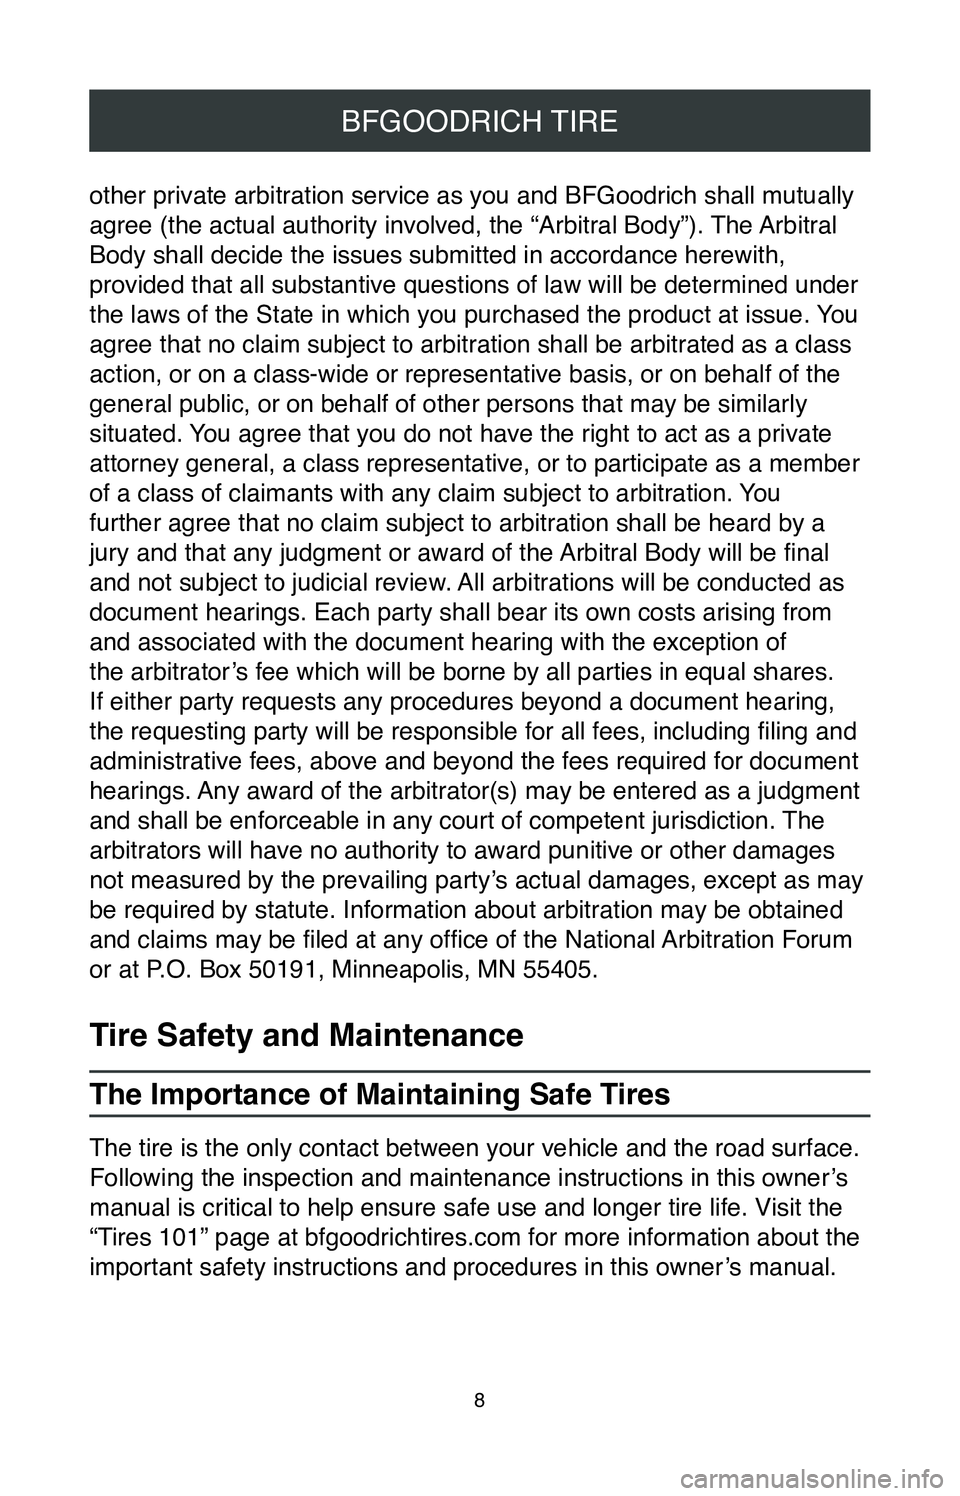 TOYOTA RAV4 2020  Warranties & Maintenance Guides (in English) 8
BFGOODRICH TIRE
other private arbitration service as you and BFGoodrich shall mutually 
agree (the actual authority involved, the “Arbitral Body”). The Arbitral 
Body shall decide the issues sub